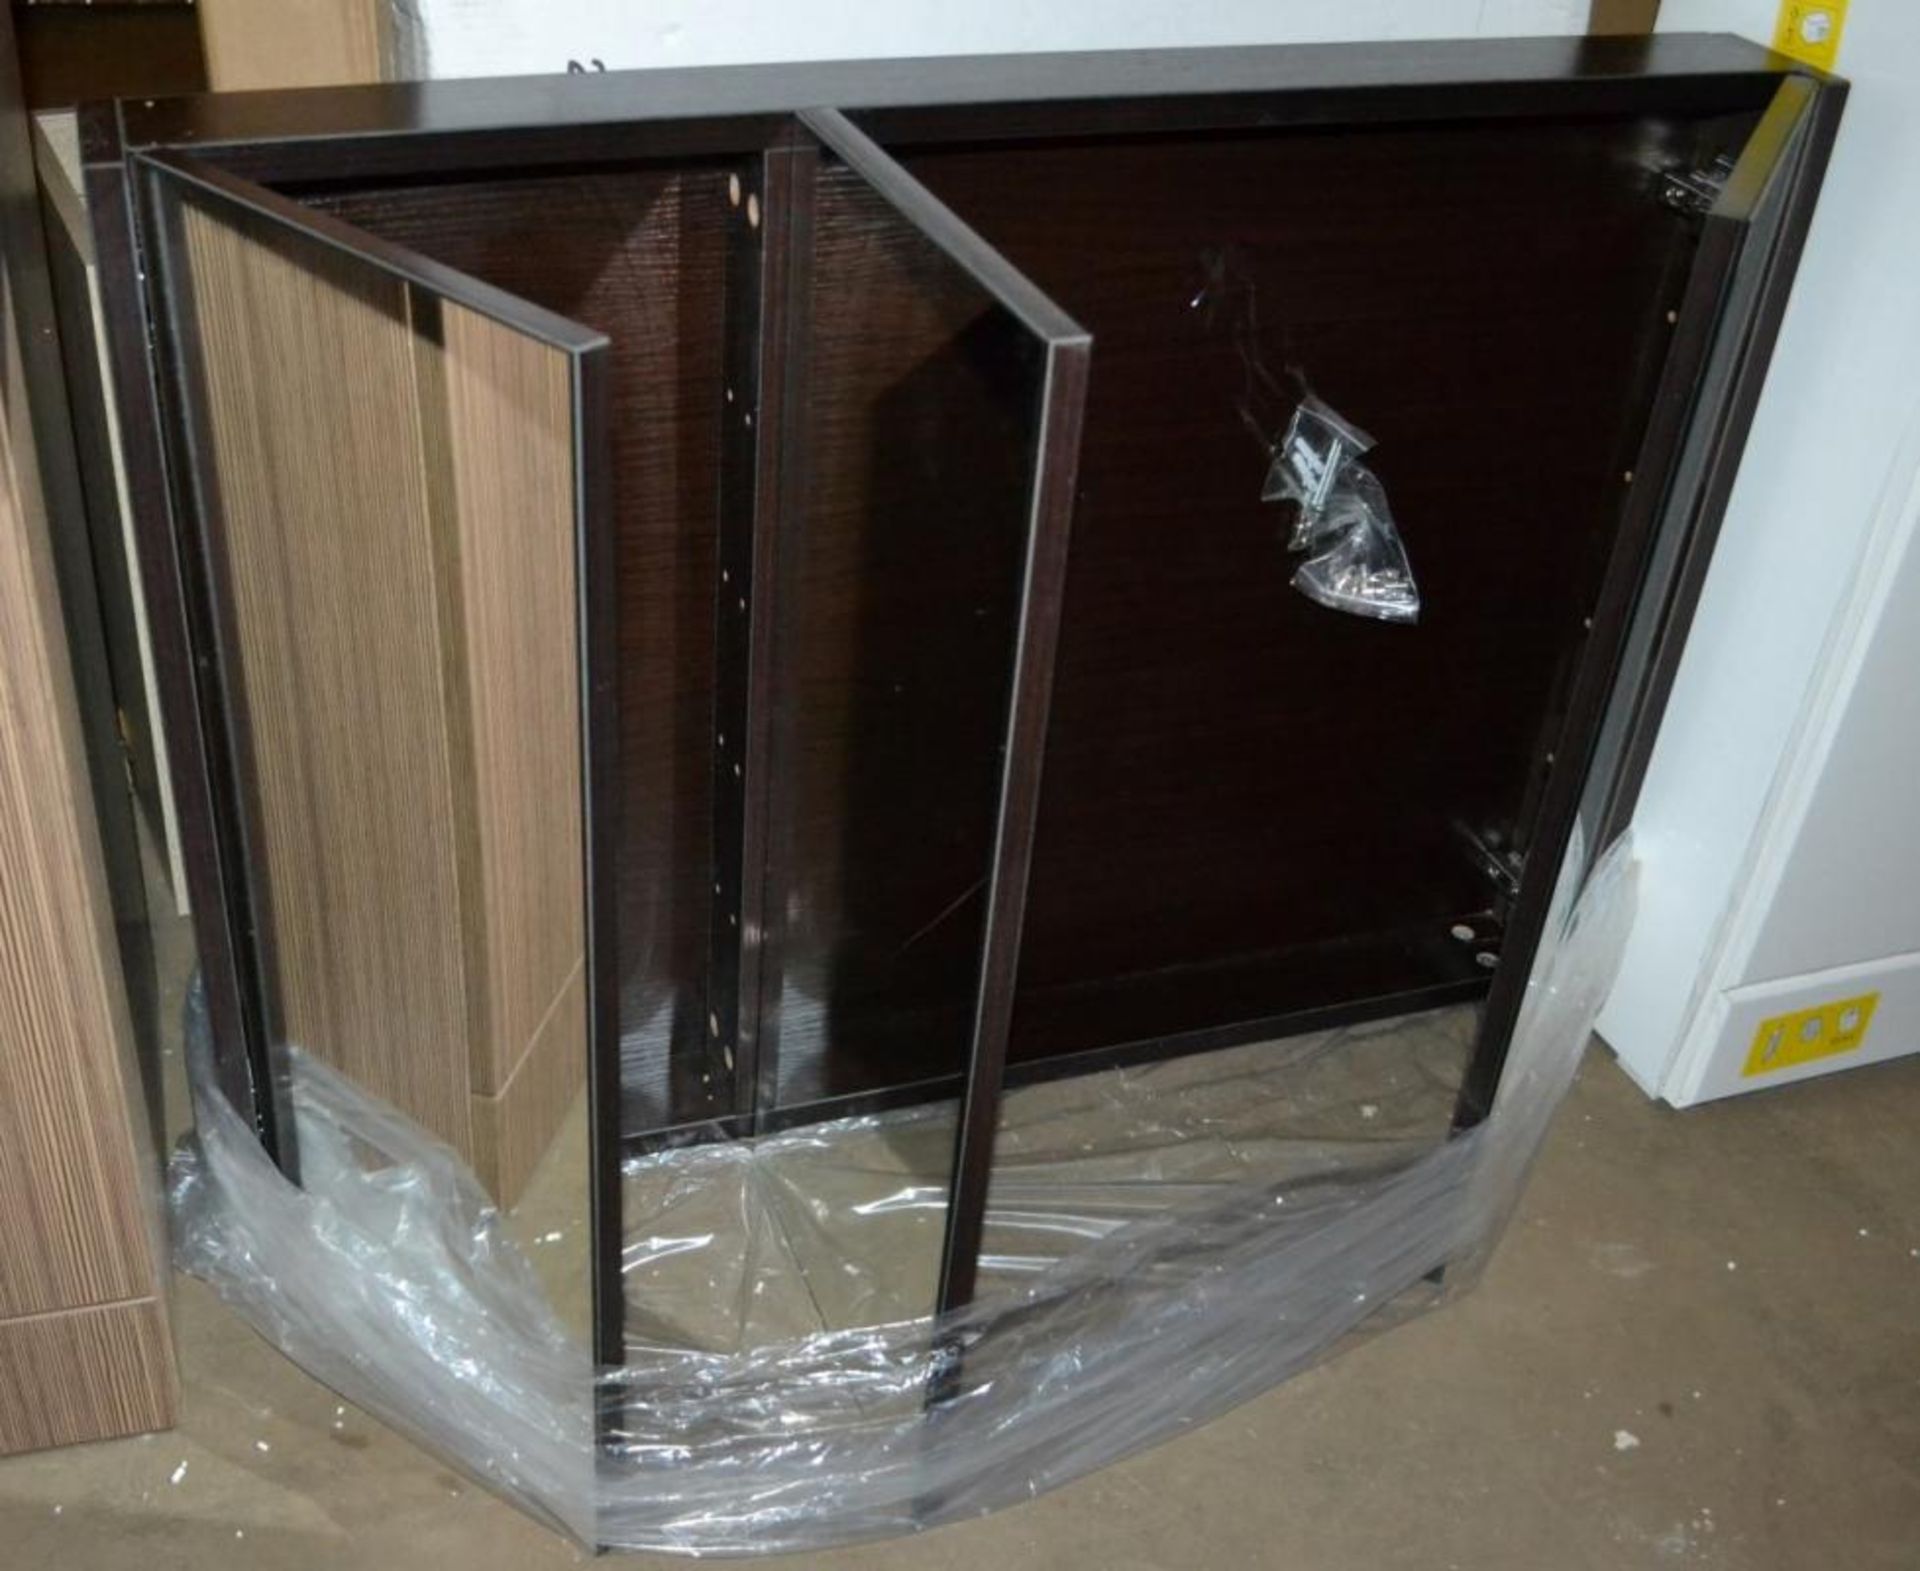 1 x Odessa Wenge 3 Door Bathroom Mirror Cabinet - Includes Sealed Bag Of Fittings - New / Unused Sto - Image 9 of 10